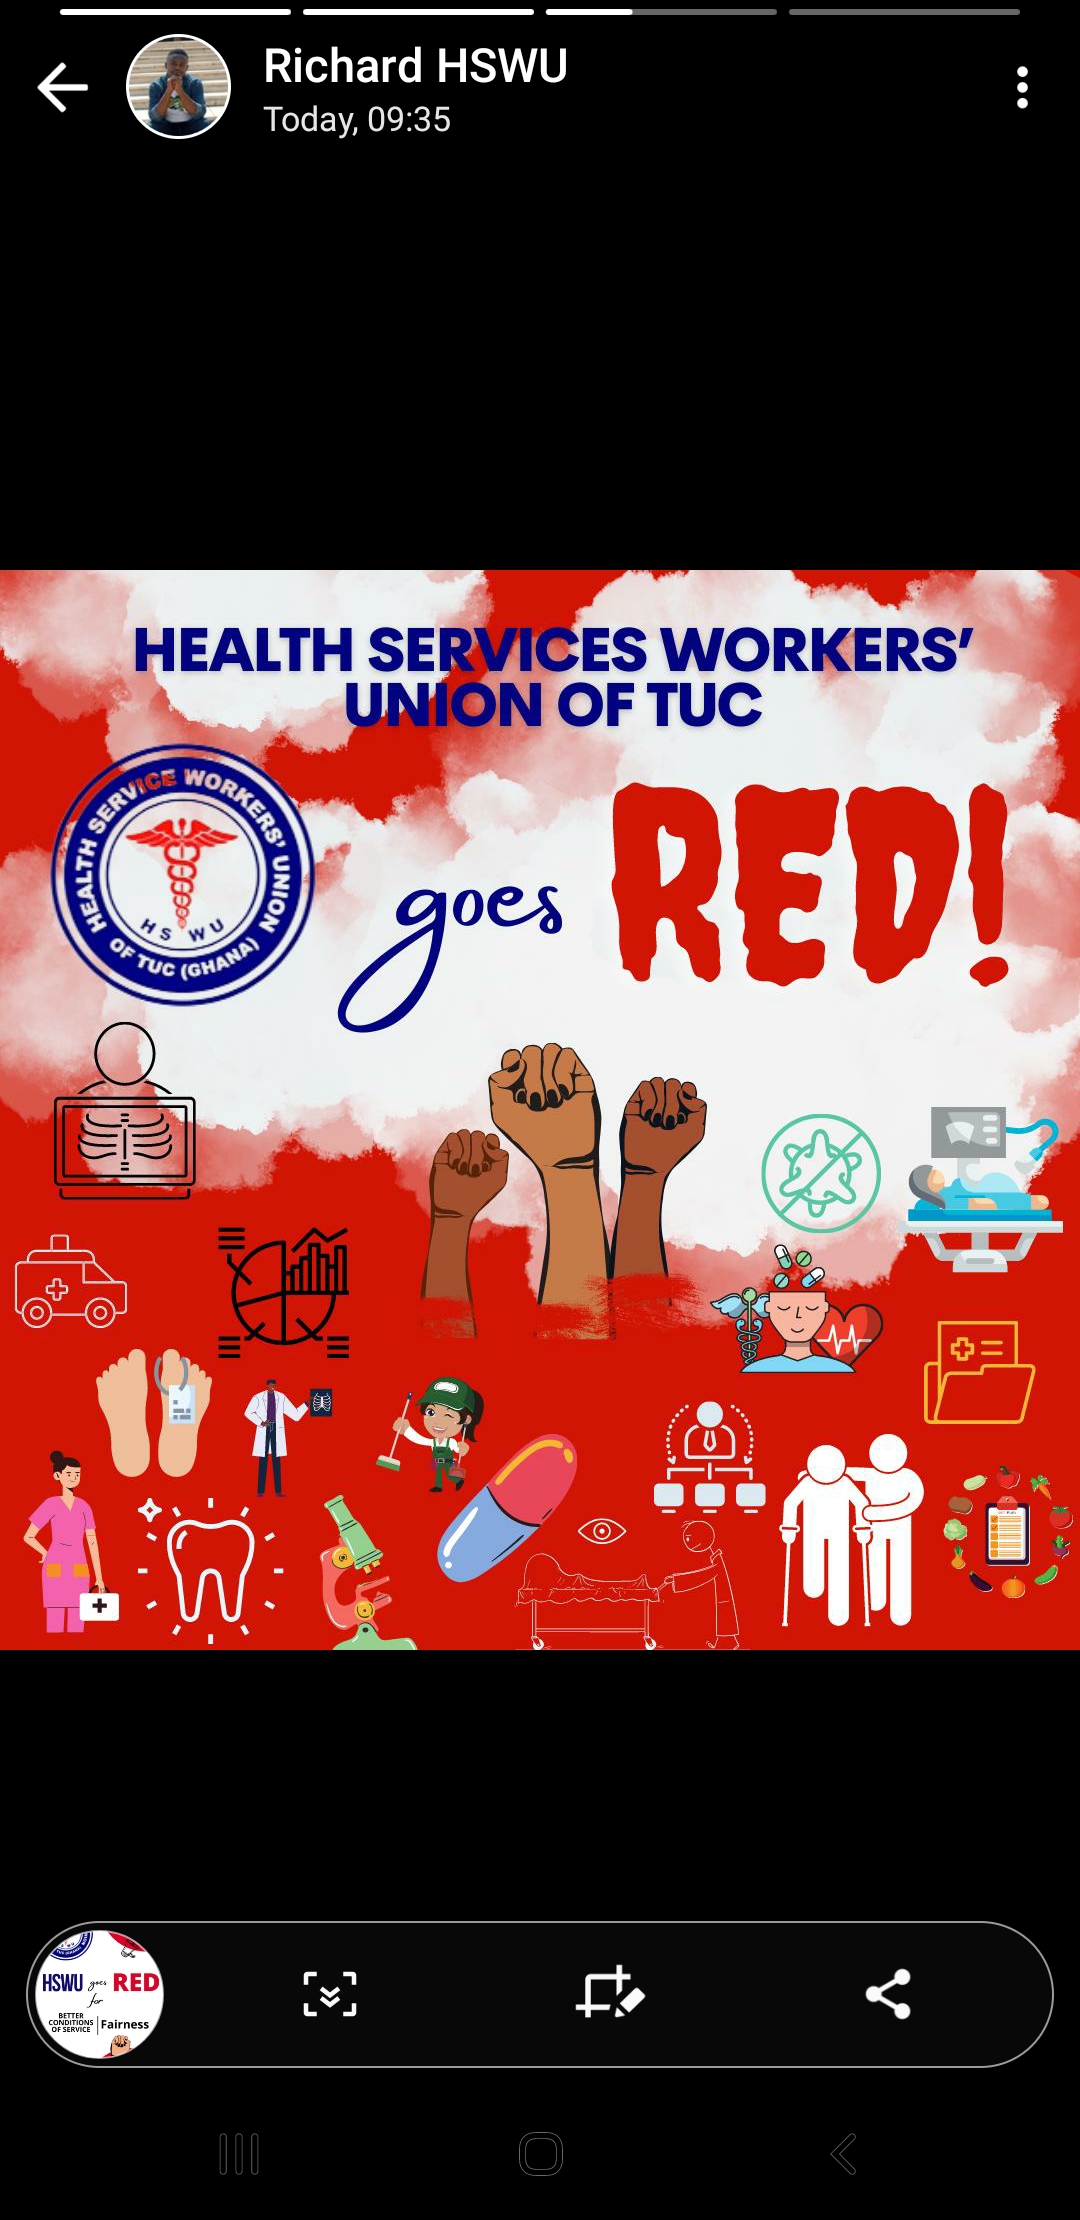 HSWU Goes Red and on Strike 